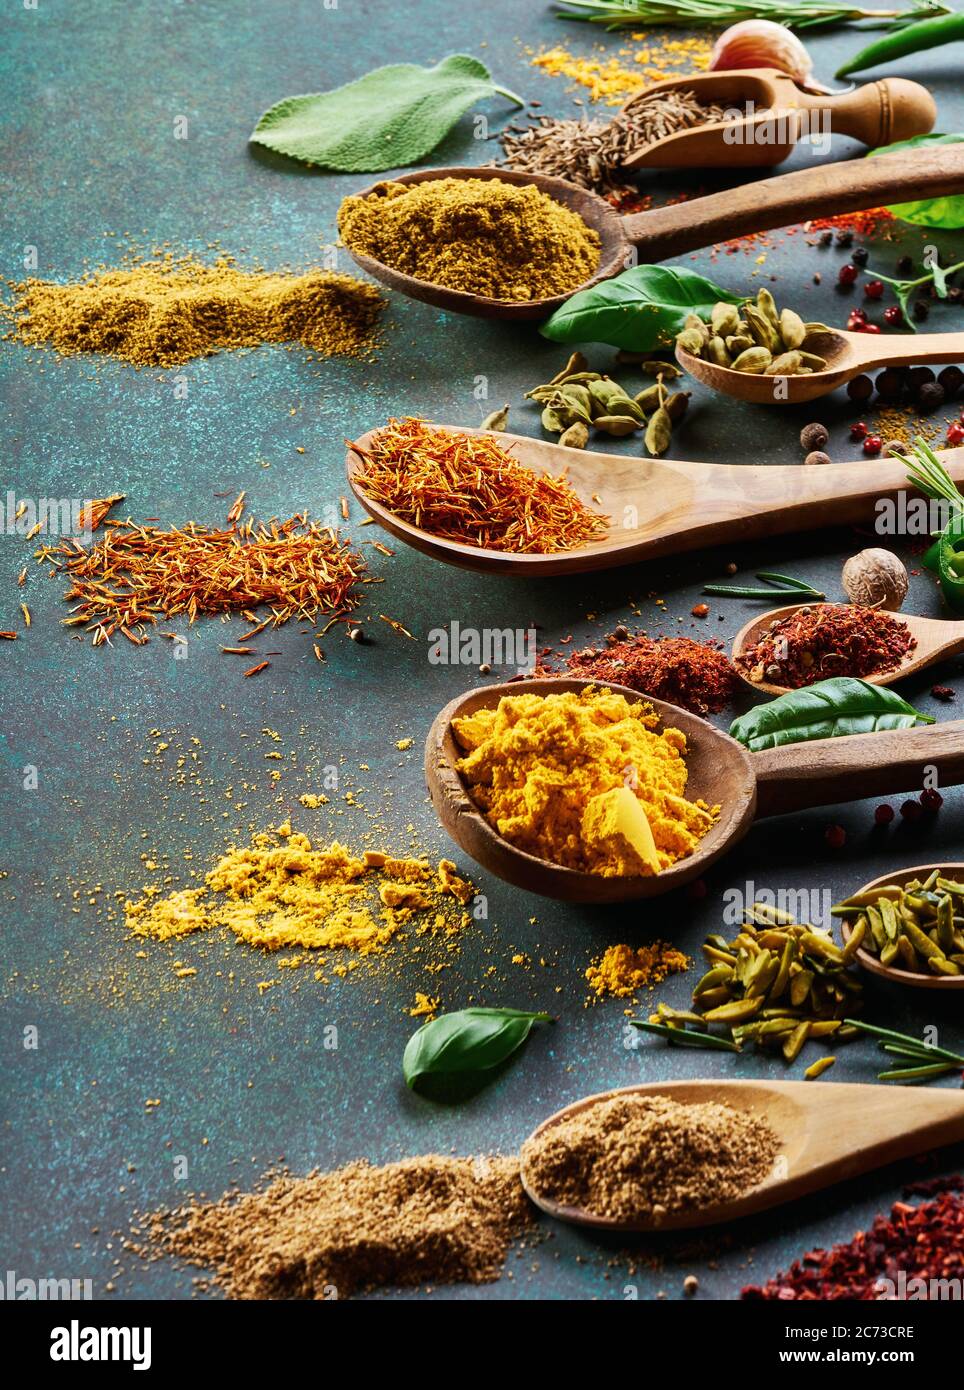 Various spice and dried herbs on dark green background. Stock Photo